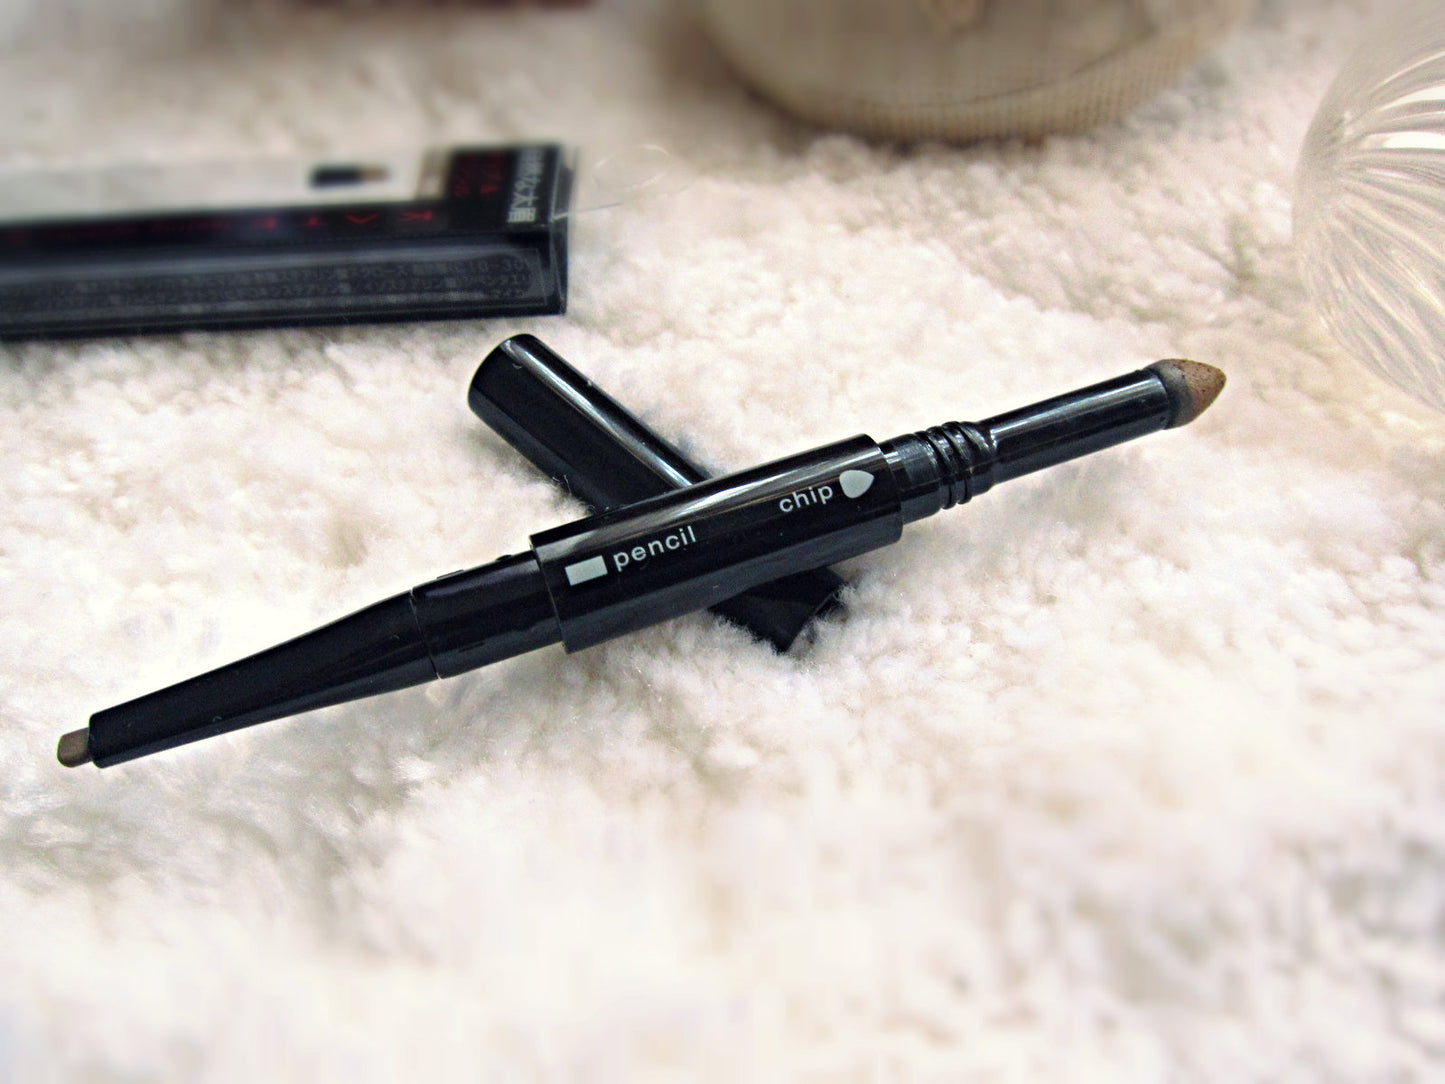 
                  
                    JAPAN KANEBO KATE Double-ended Lasting Eyebrow Pencil #BR-3 Brown
                  
                